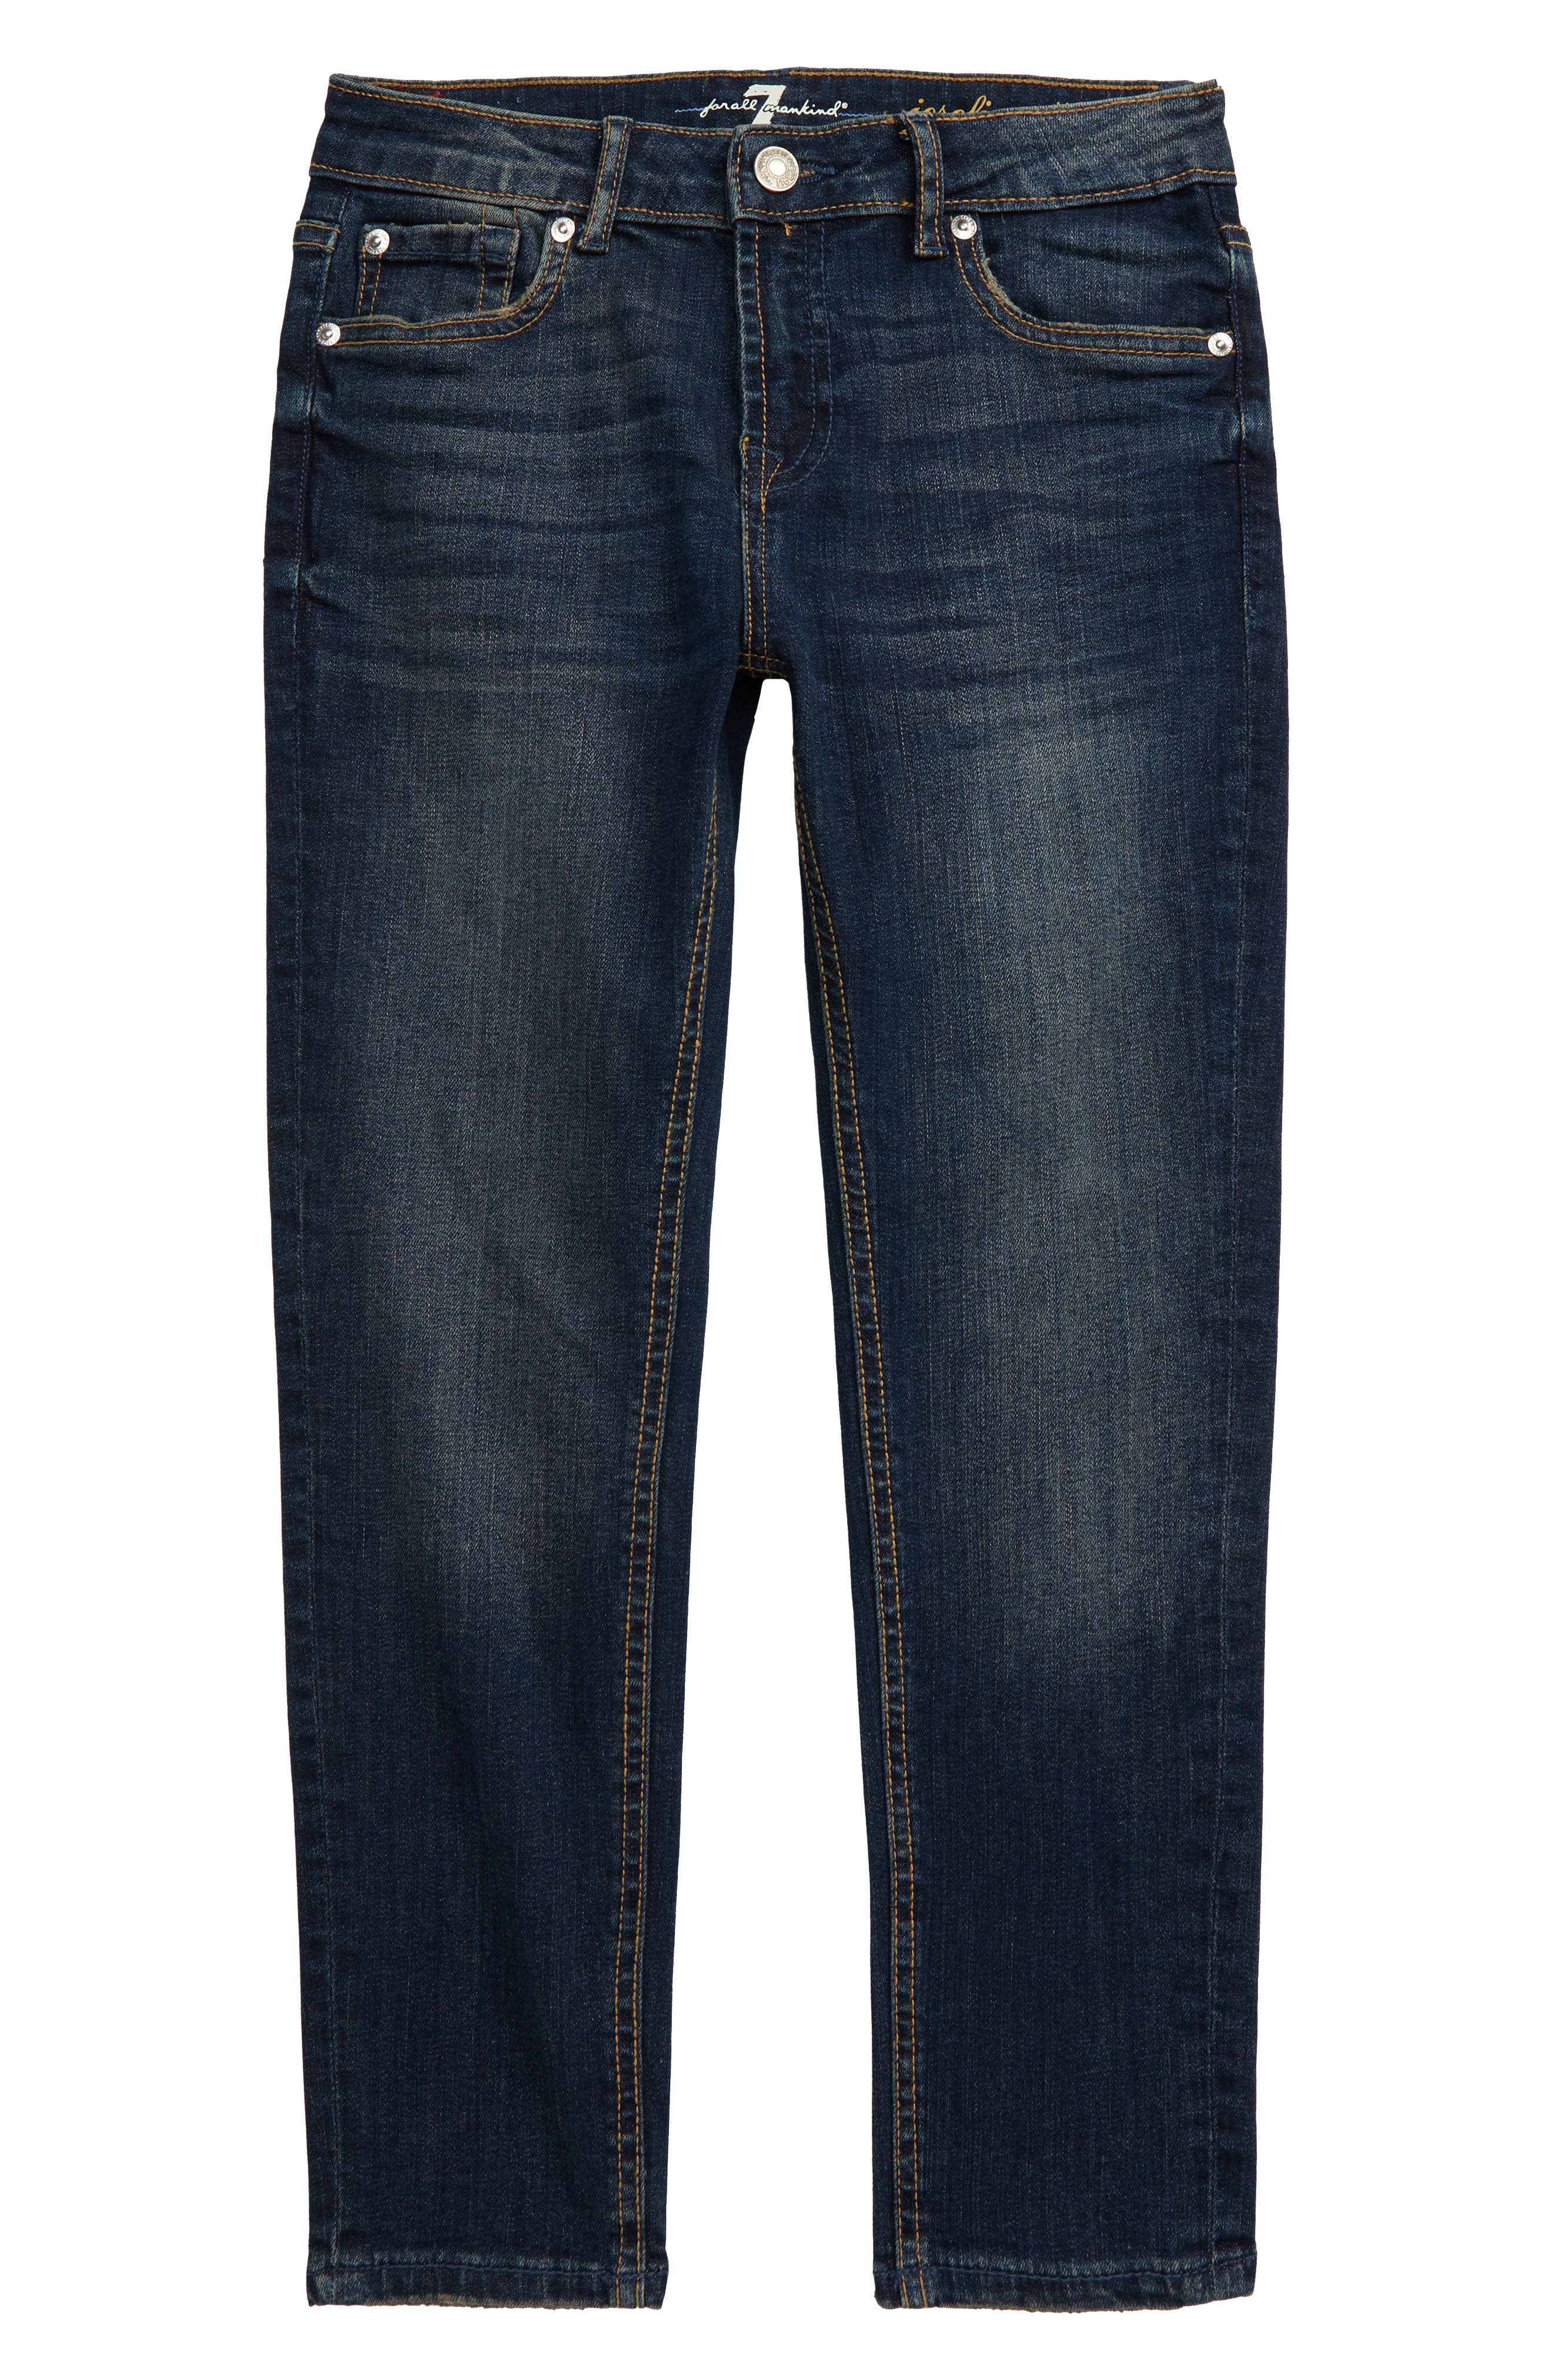 7 for all mankind girls jeans